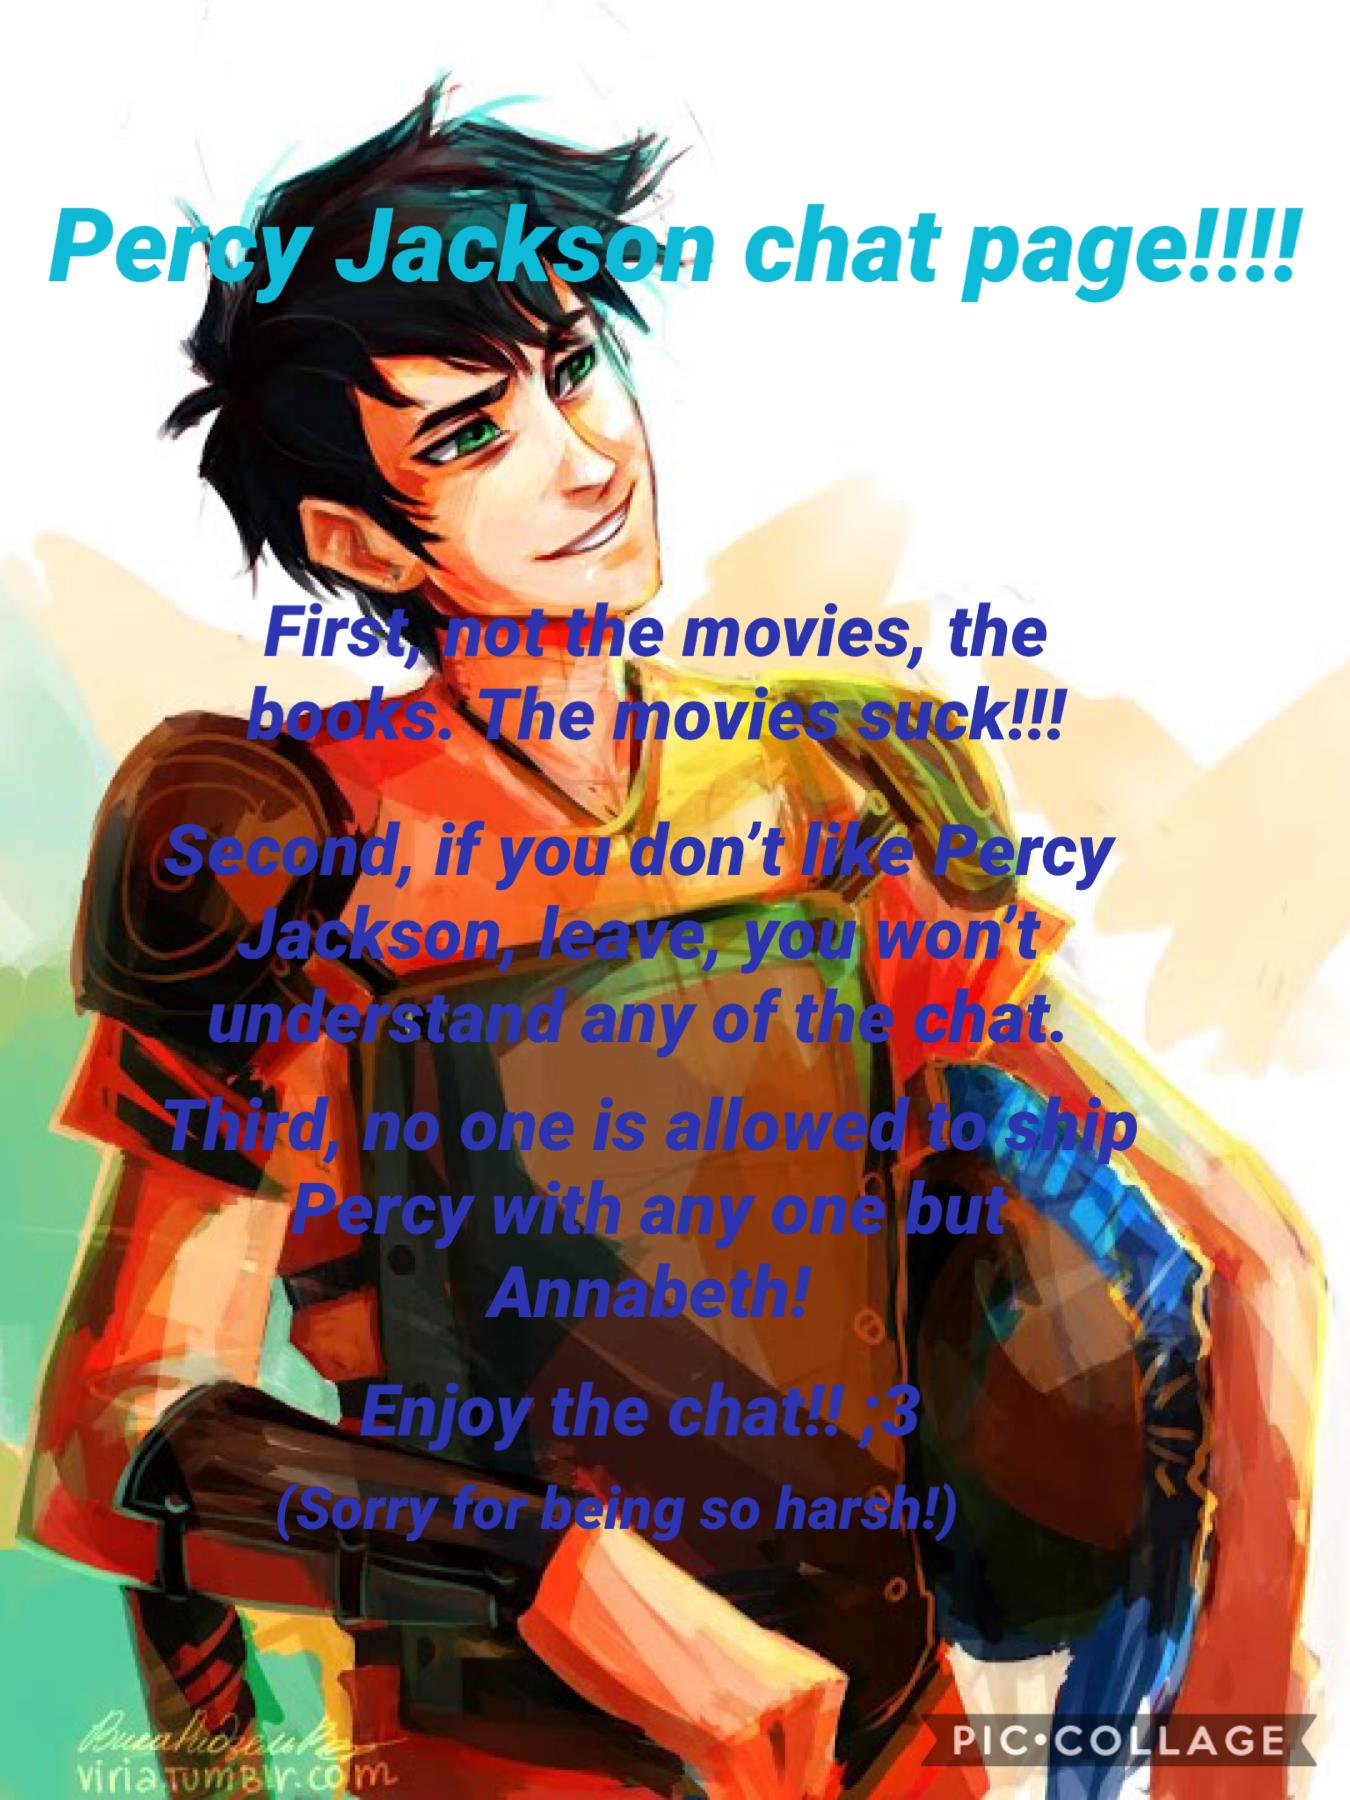 Percy Jackson chat page open!